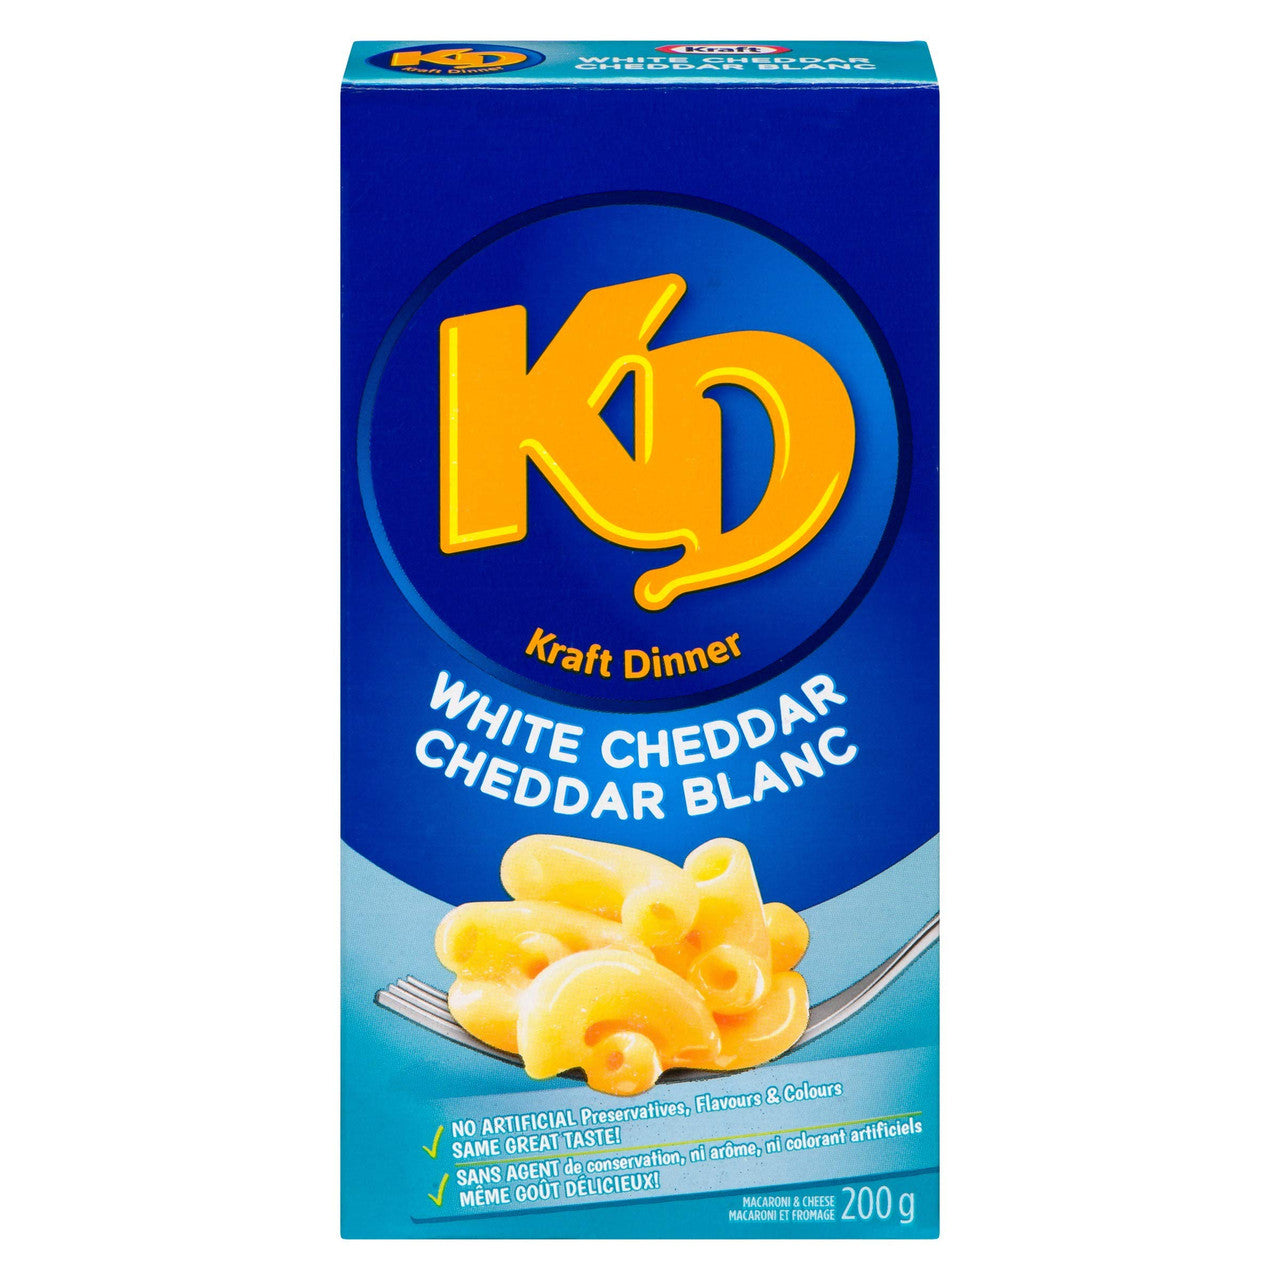 Kraft Dinner White Cheddar Mac & Cheese, 200g/7.1oz, 24ct {Imported from Canada}